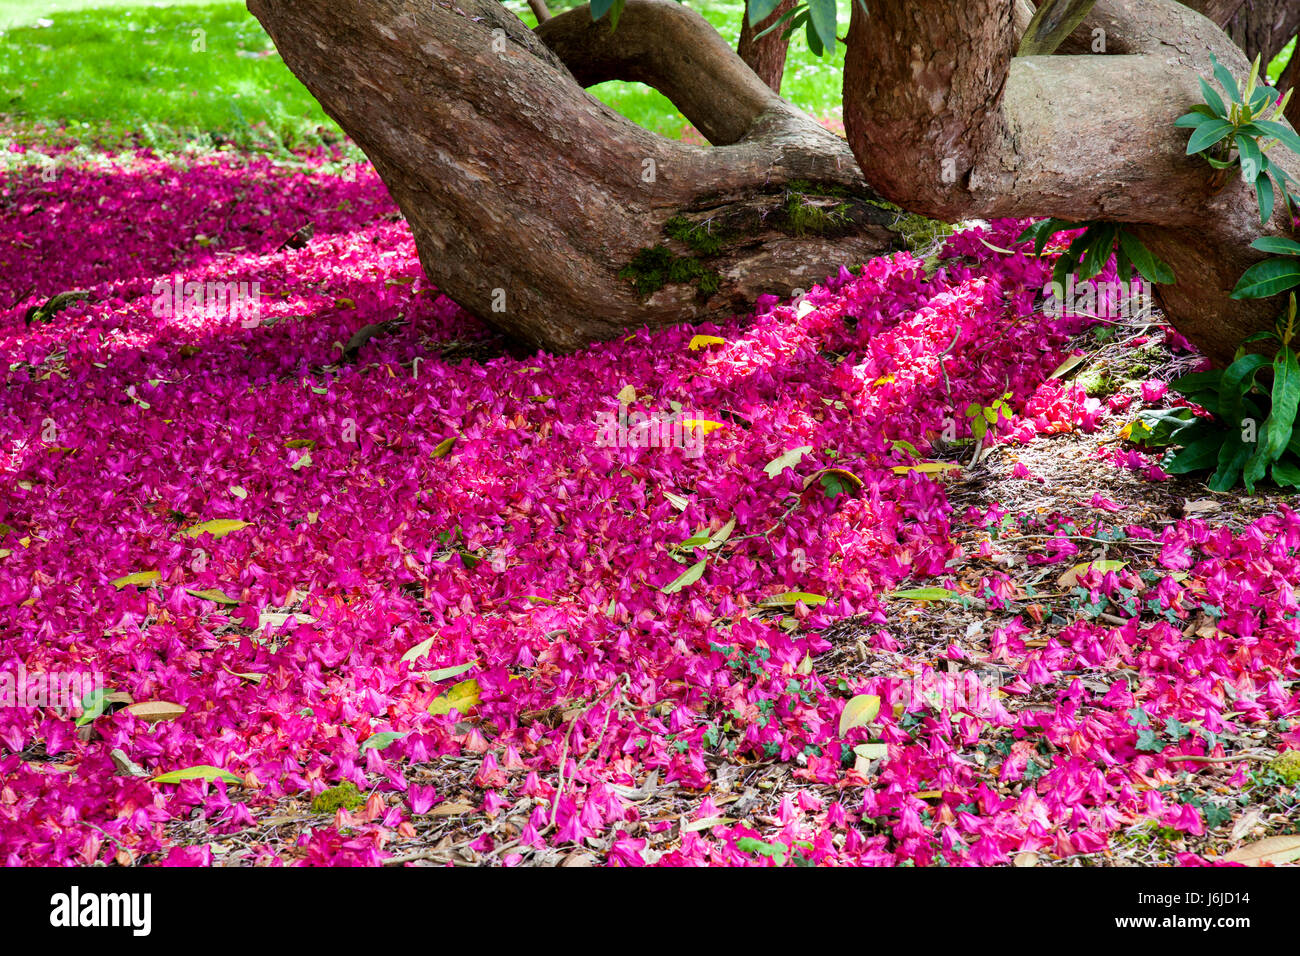 A Carpet of Rhododendron flowers on the ground Stock Photo